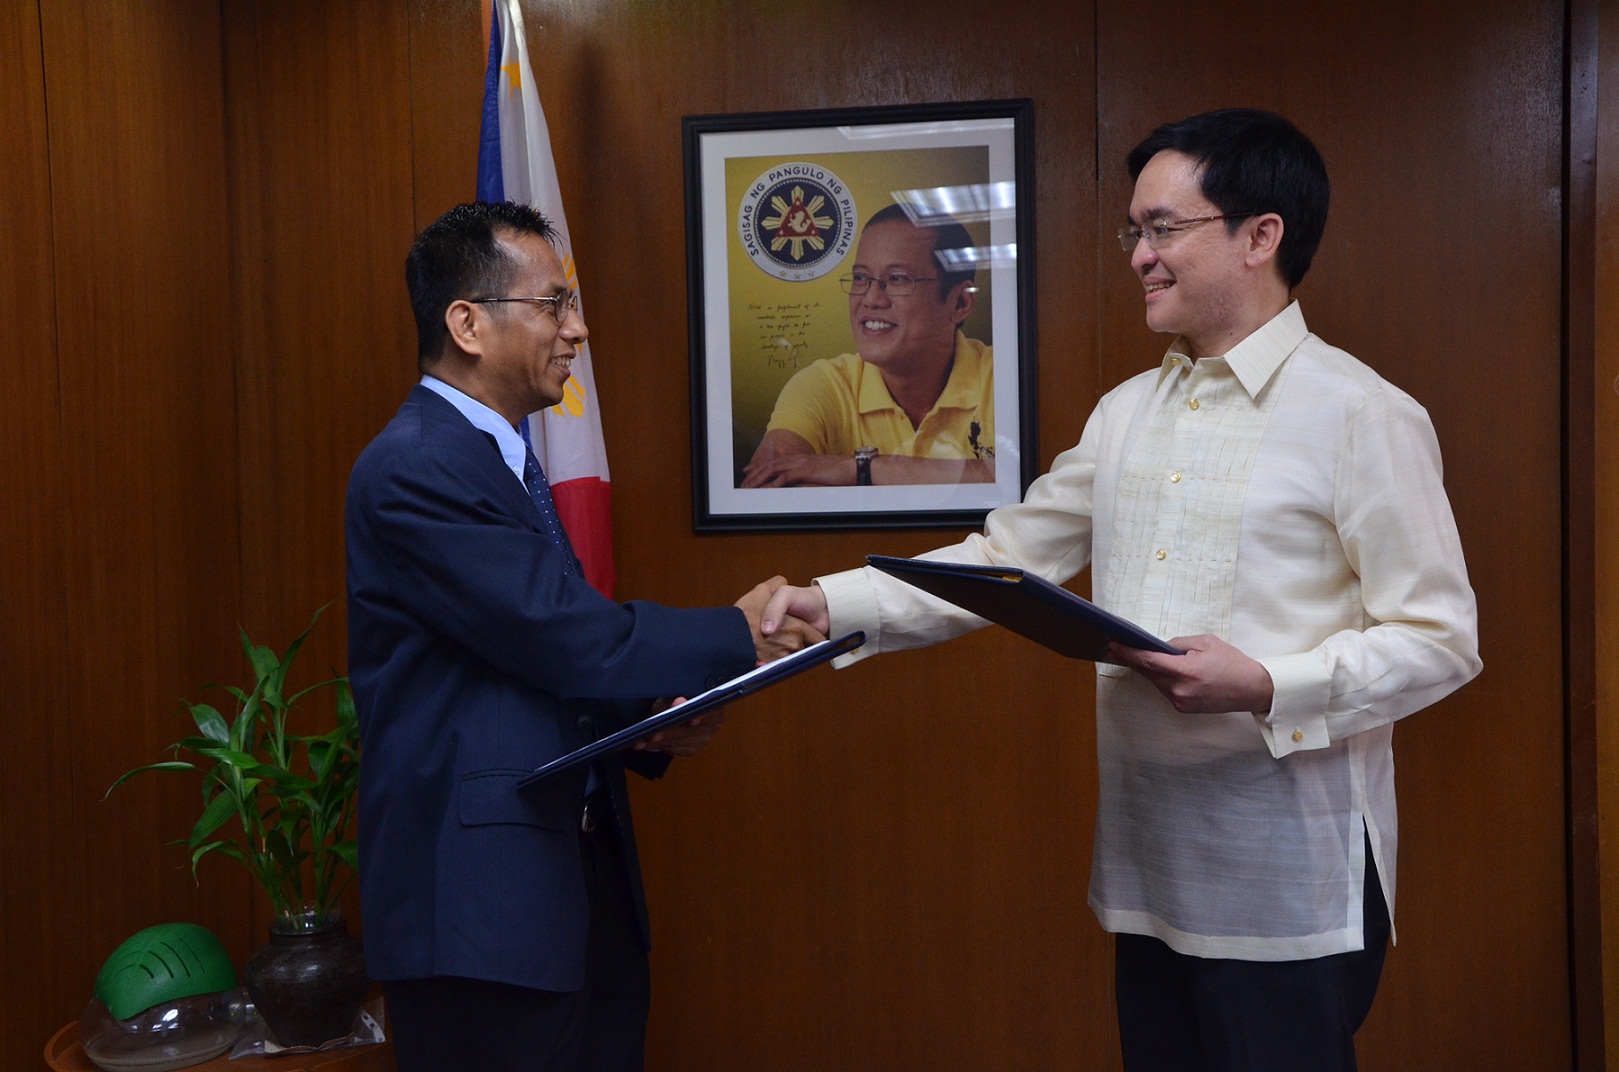 NEW NSCB SECRETARY GENERAL. (From left) Socioeconomic Planning Secretary Arsenio Balisacan shakes the hand of Dr. Jose Ramon Albert who becomes the NSCB's 3rd Secretary General. Photo taken by Leody Barcelon of the National Economic and Development Authority.